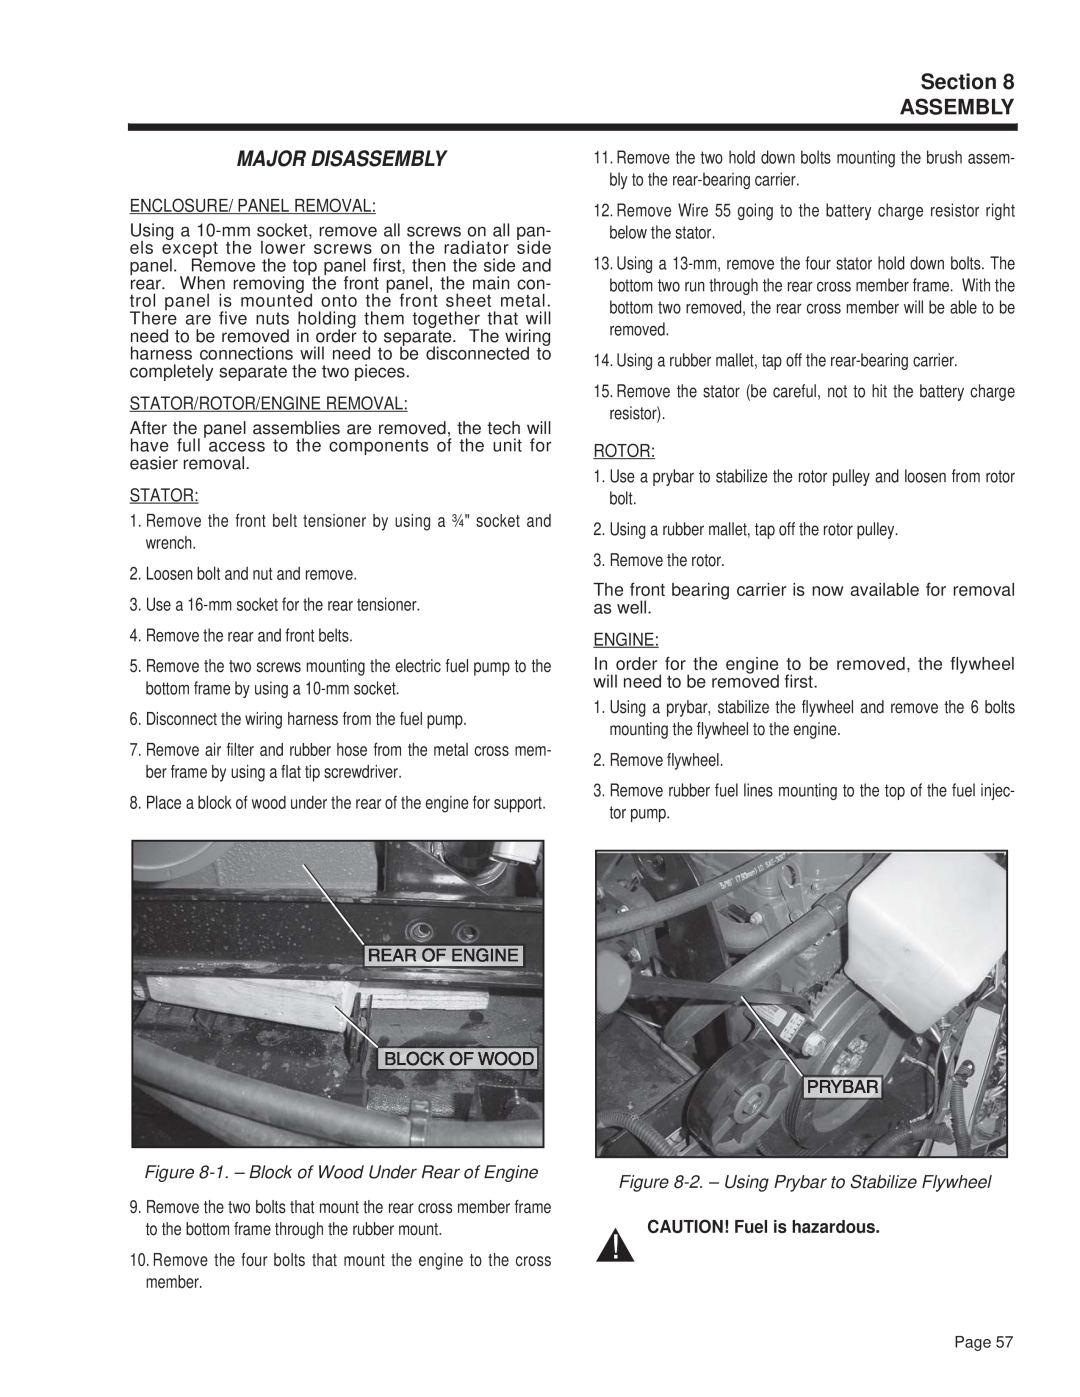 Guardian Technologies 4270 manual Section ASSEMBLY, Major Disassembly, 1. - Block of Wood Under Rear of Engine 